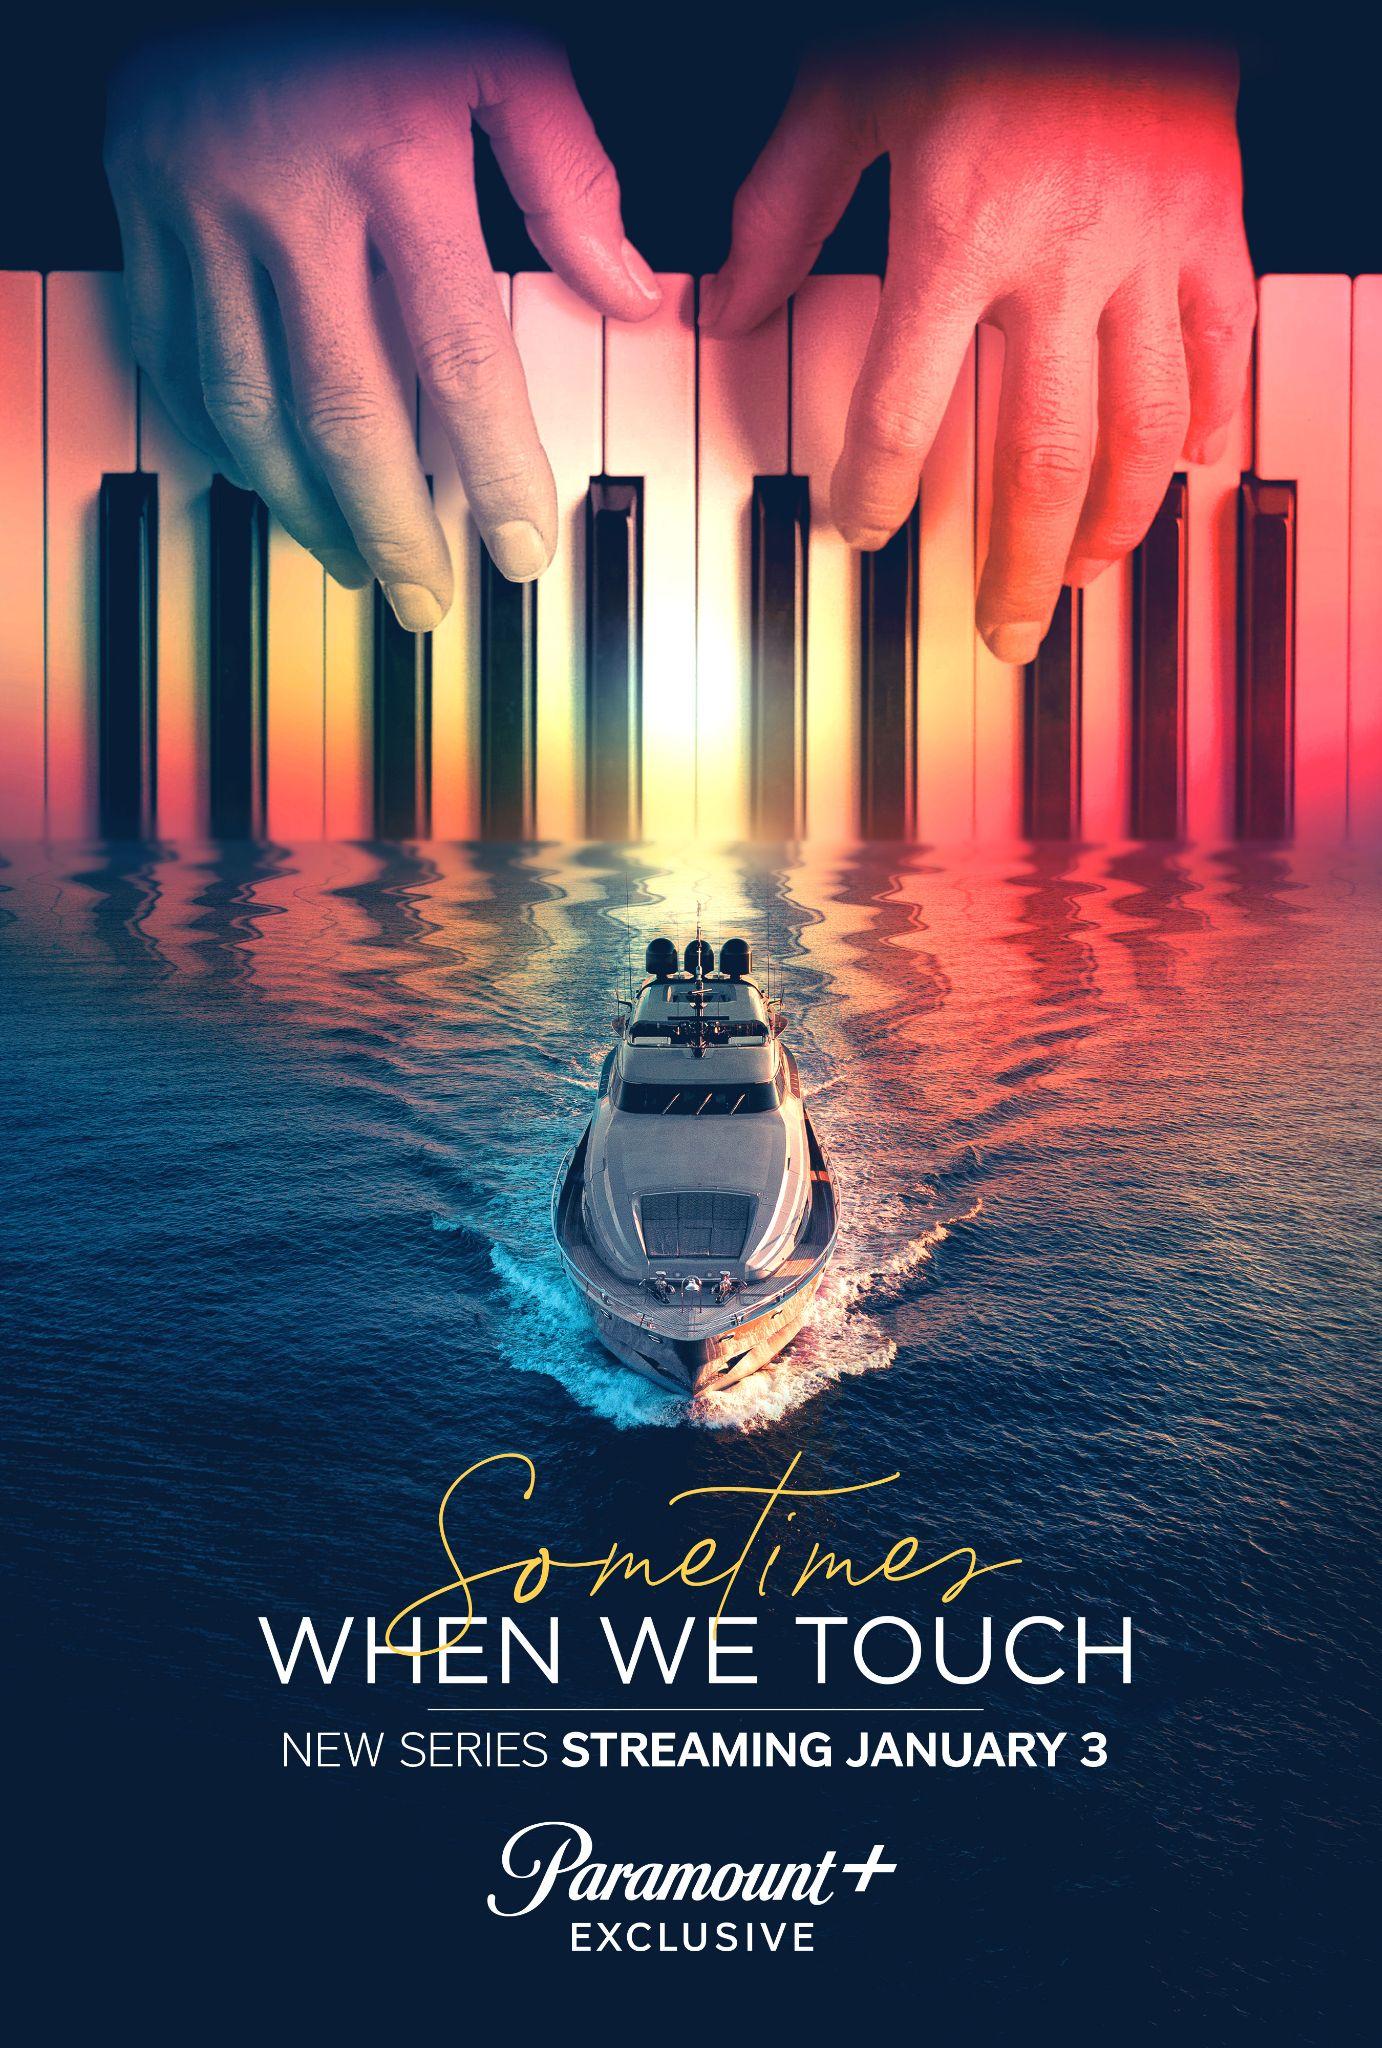 Paramount Press Express ANNOUNCES DOCUMENTARY SERIES EXPLORING THE HISTORY OF SOFT ROCK MUSIC, “SOMETIMES WHEN WE TOUCH,” TO PREMIERE TUESDAY, JAN. 3